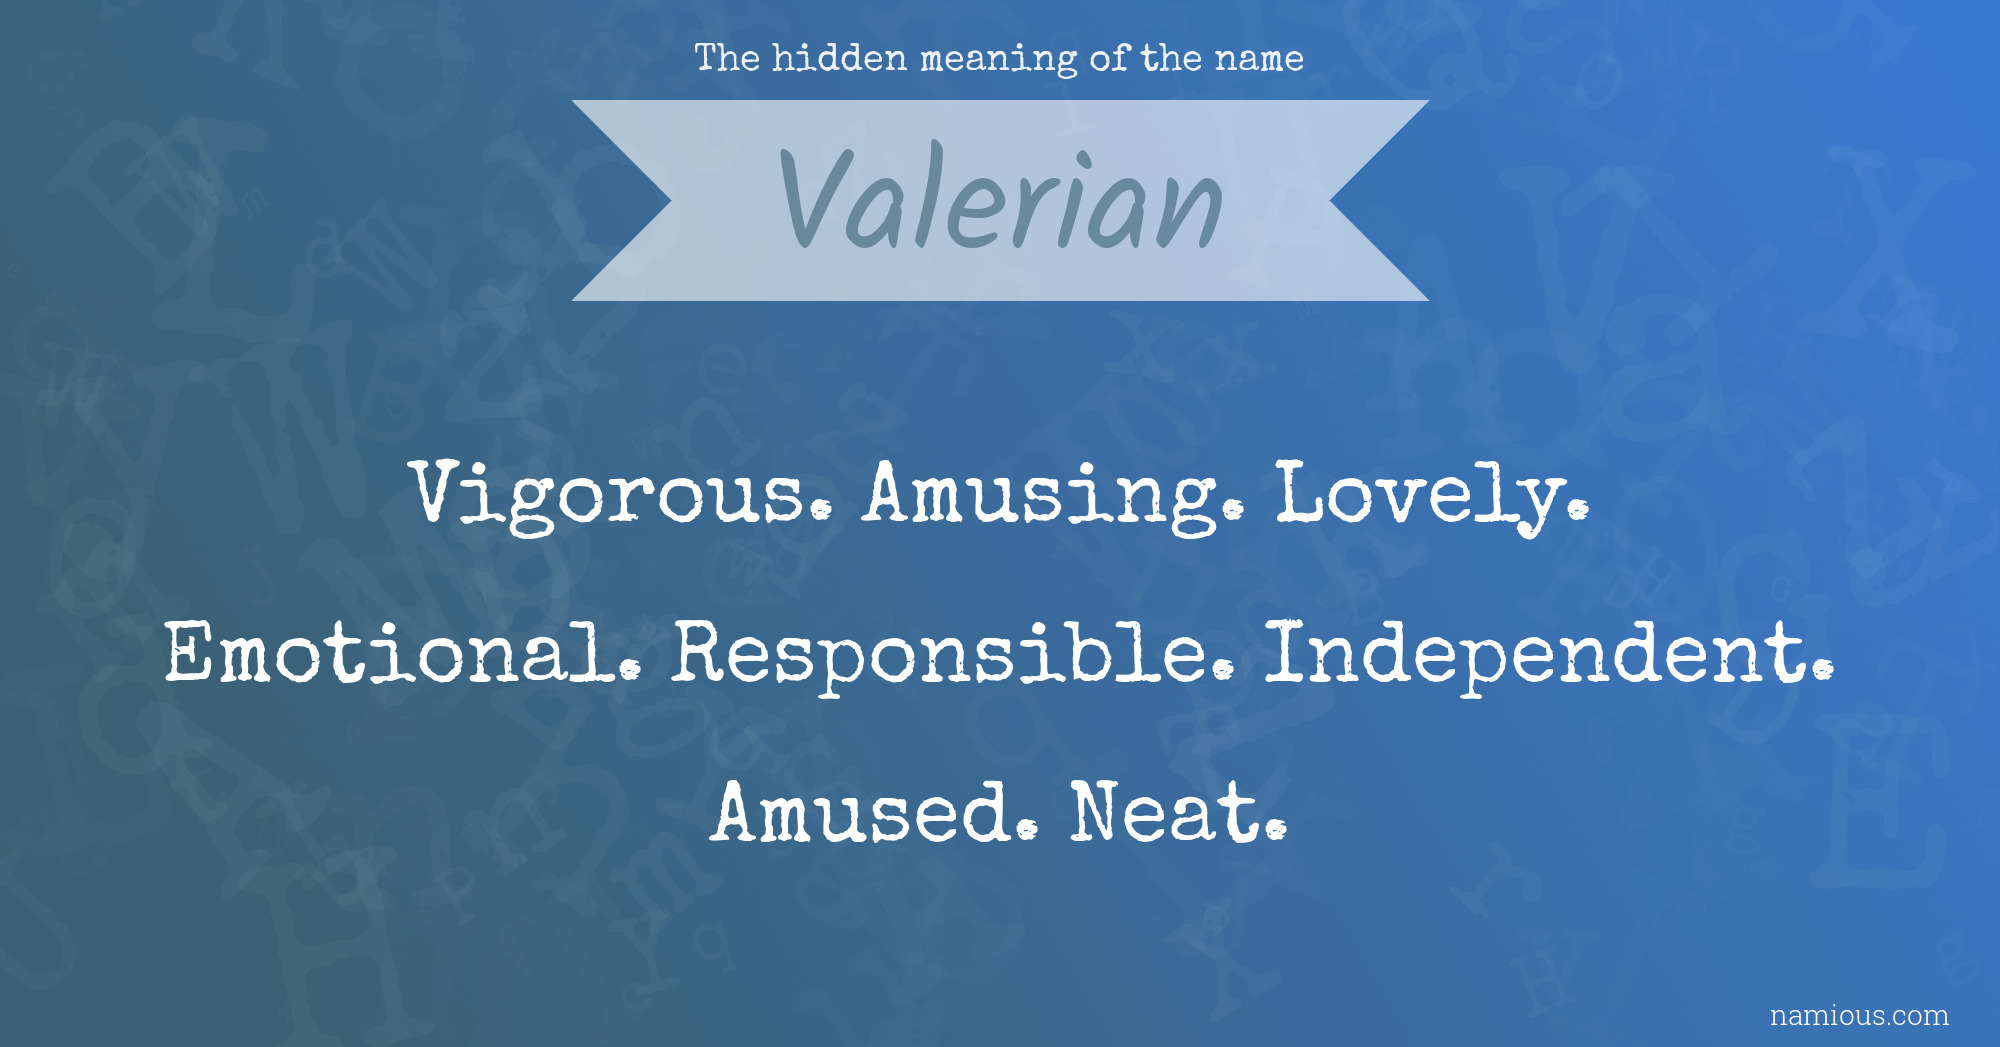 The hidden meaning of the name Valerian